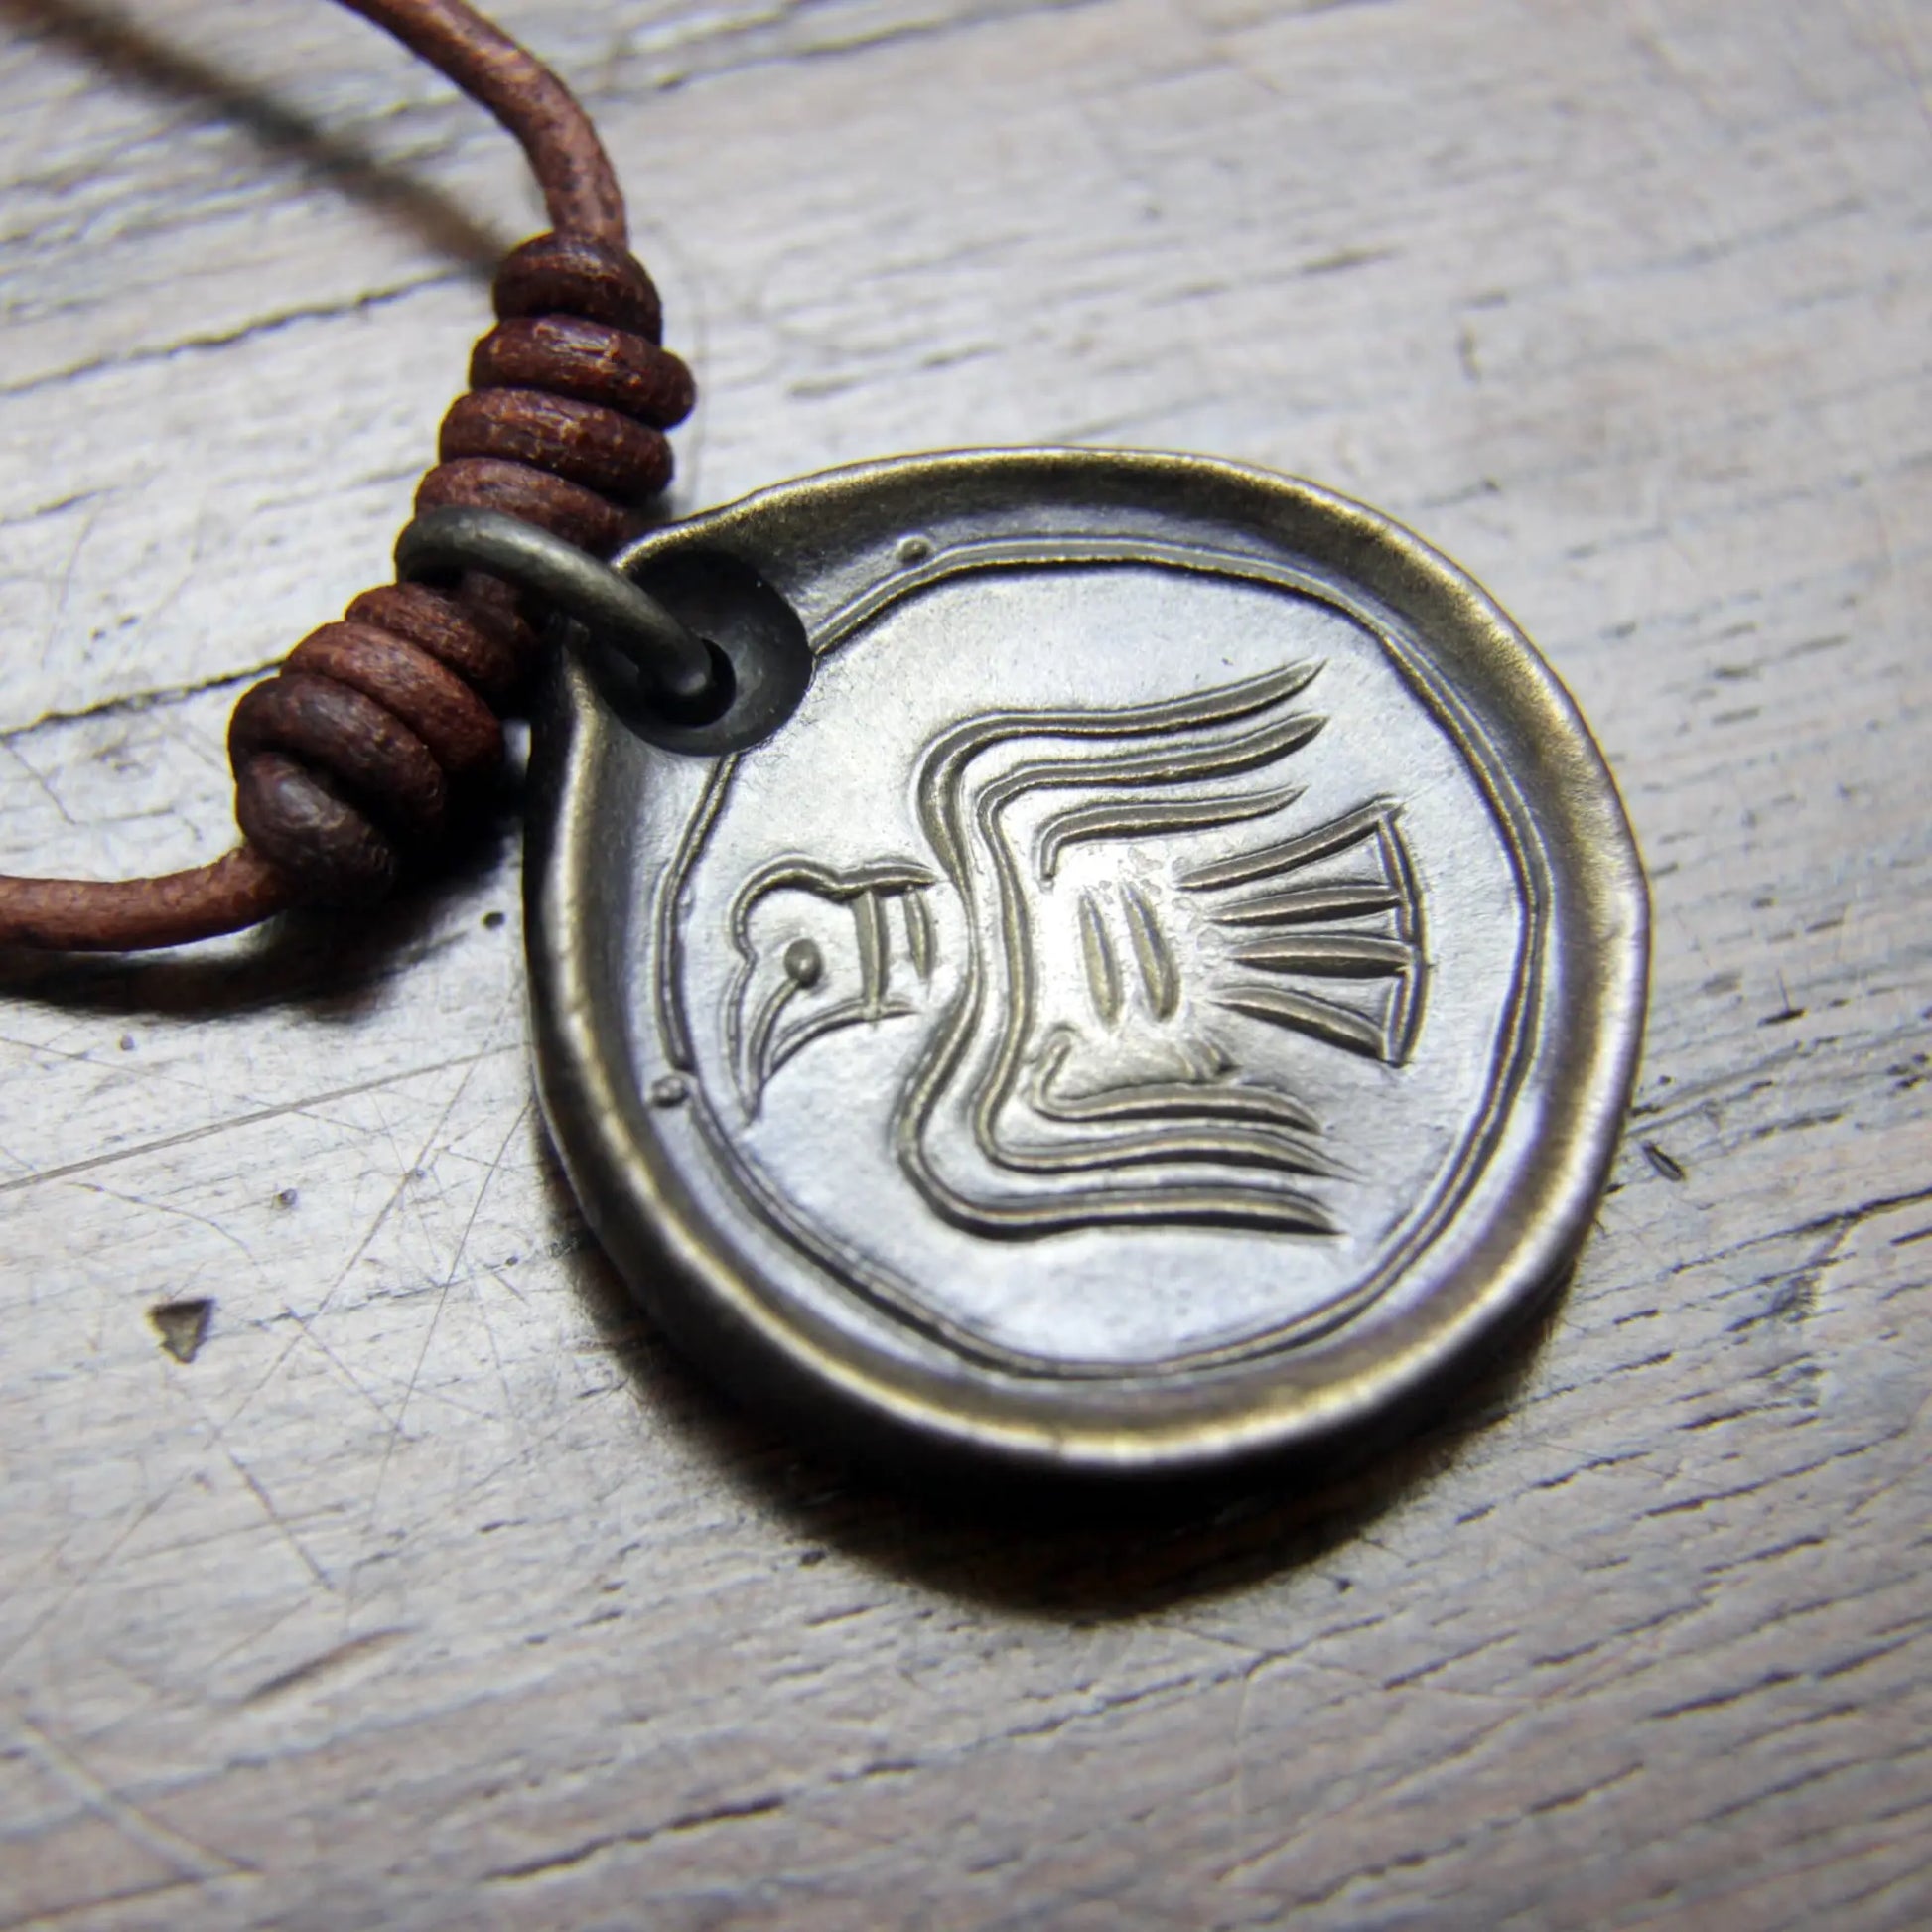 Viking Raven Iron Coin Necklace. Norse Raven medallion pendant that can be personalised with silver inlay or a personal engraving.